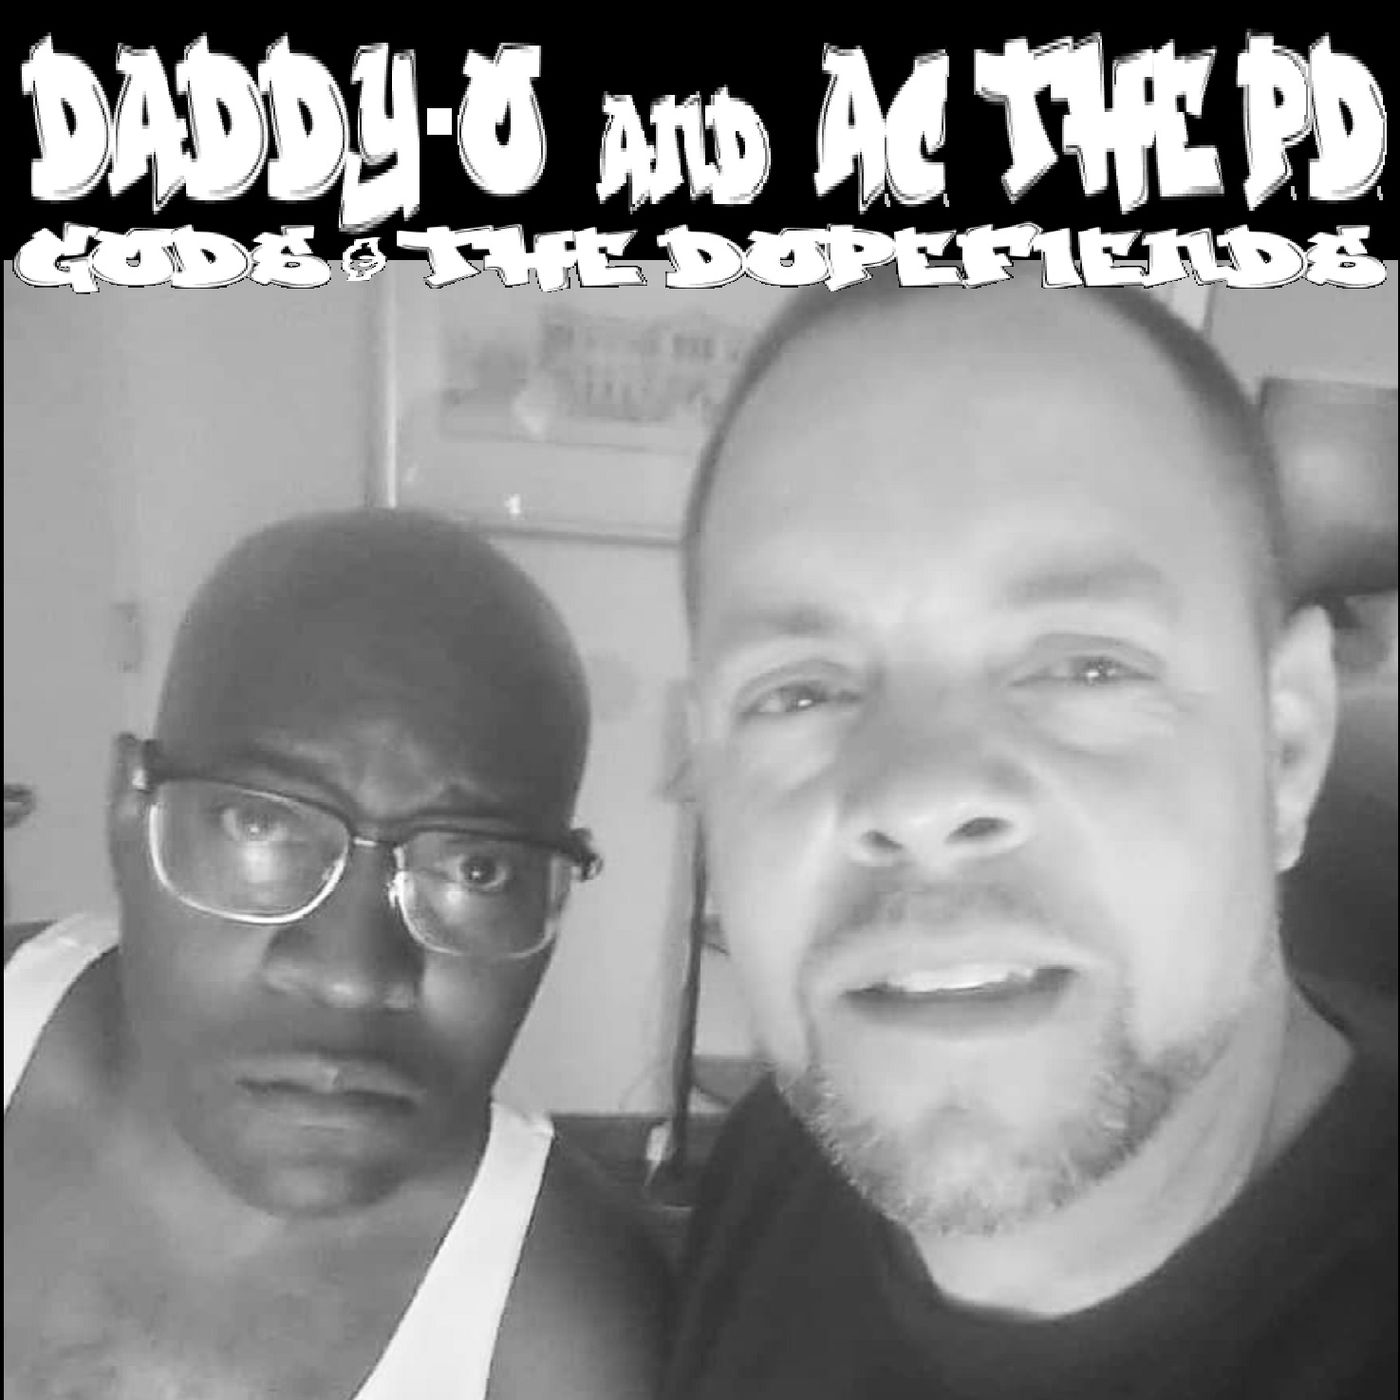 Daddy-O ft Ruste Juxx - Gods & The Dopefiends - AC The PD aka El Choppo remix - HipHop Philosophy Records